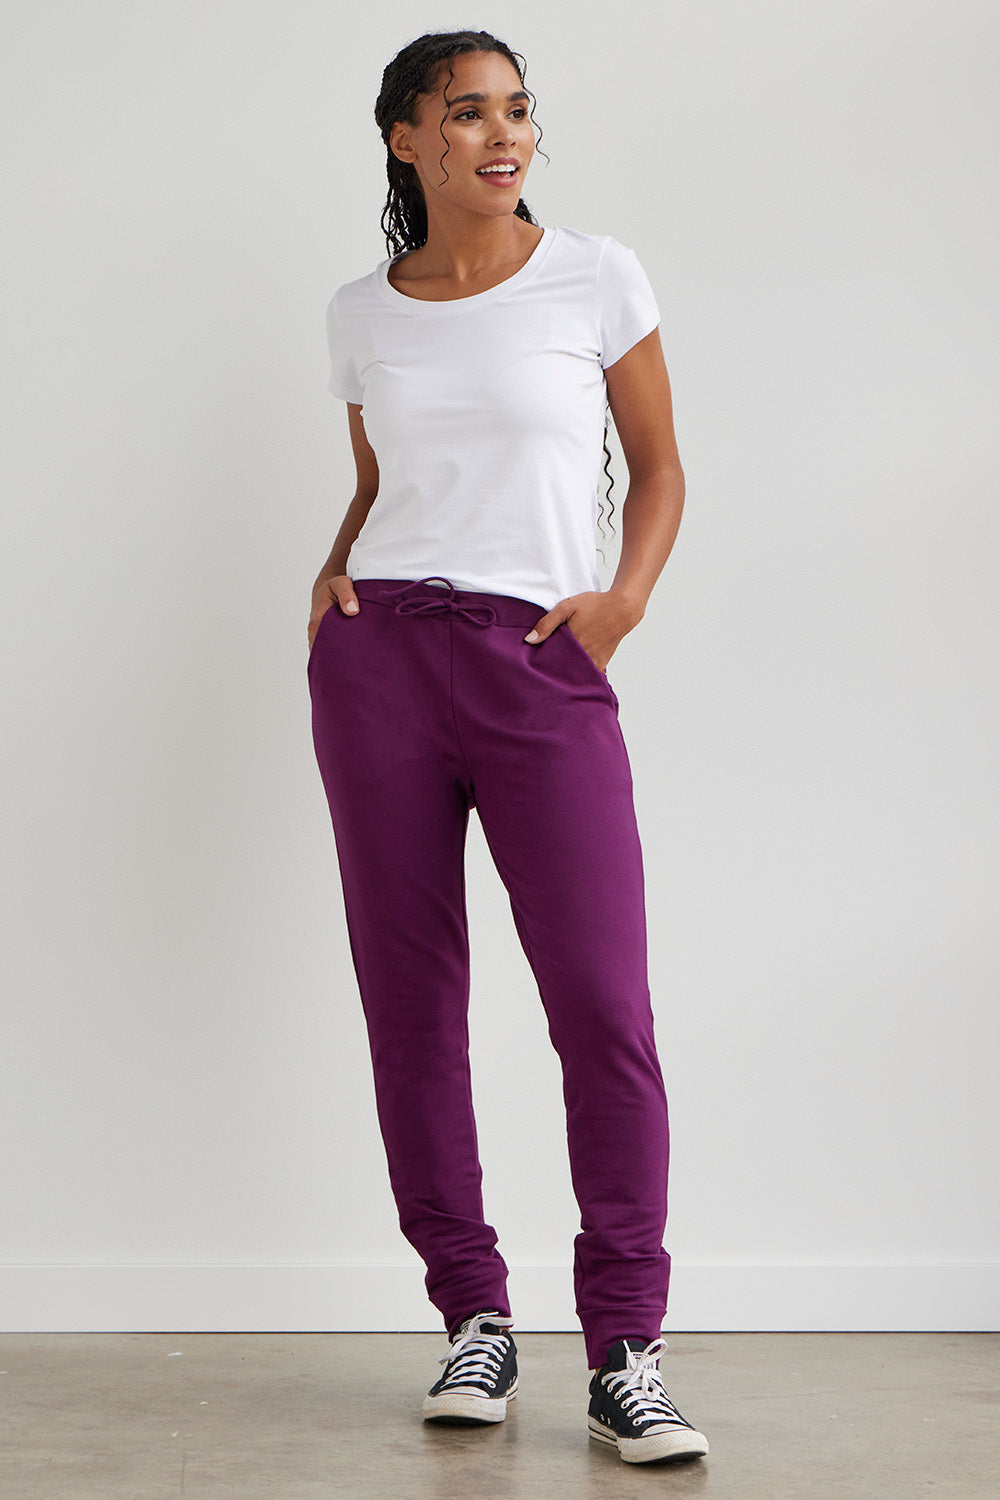 Athletic Works Womens Super Soft Lightweight Joggers India